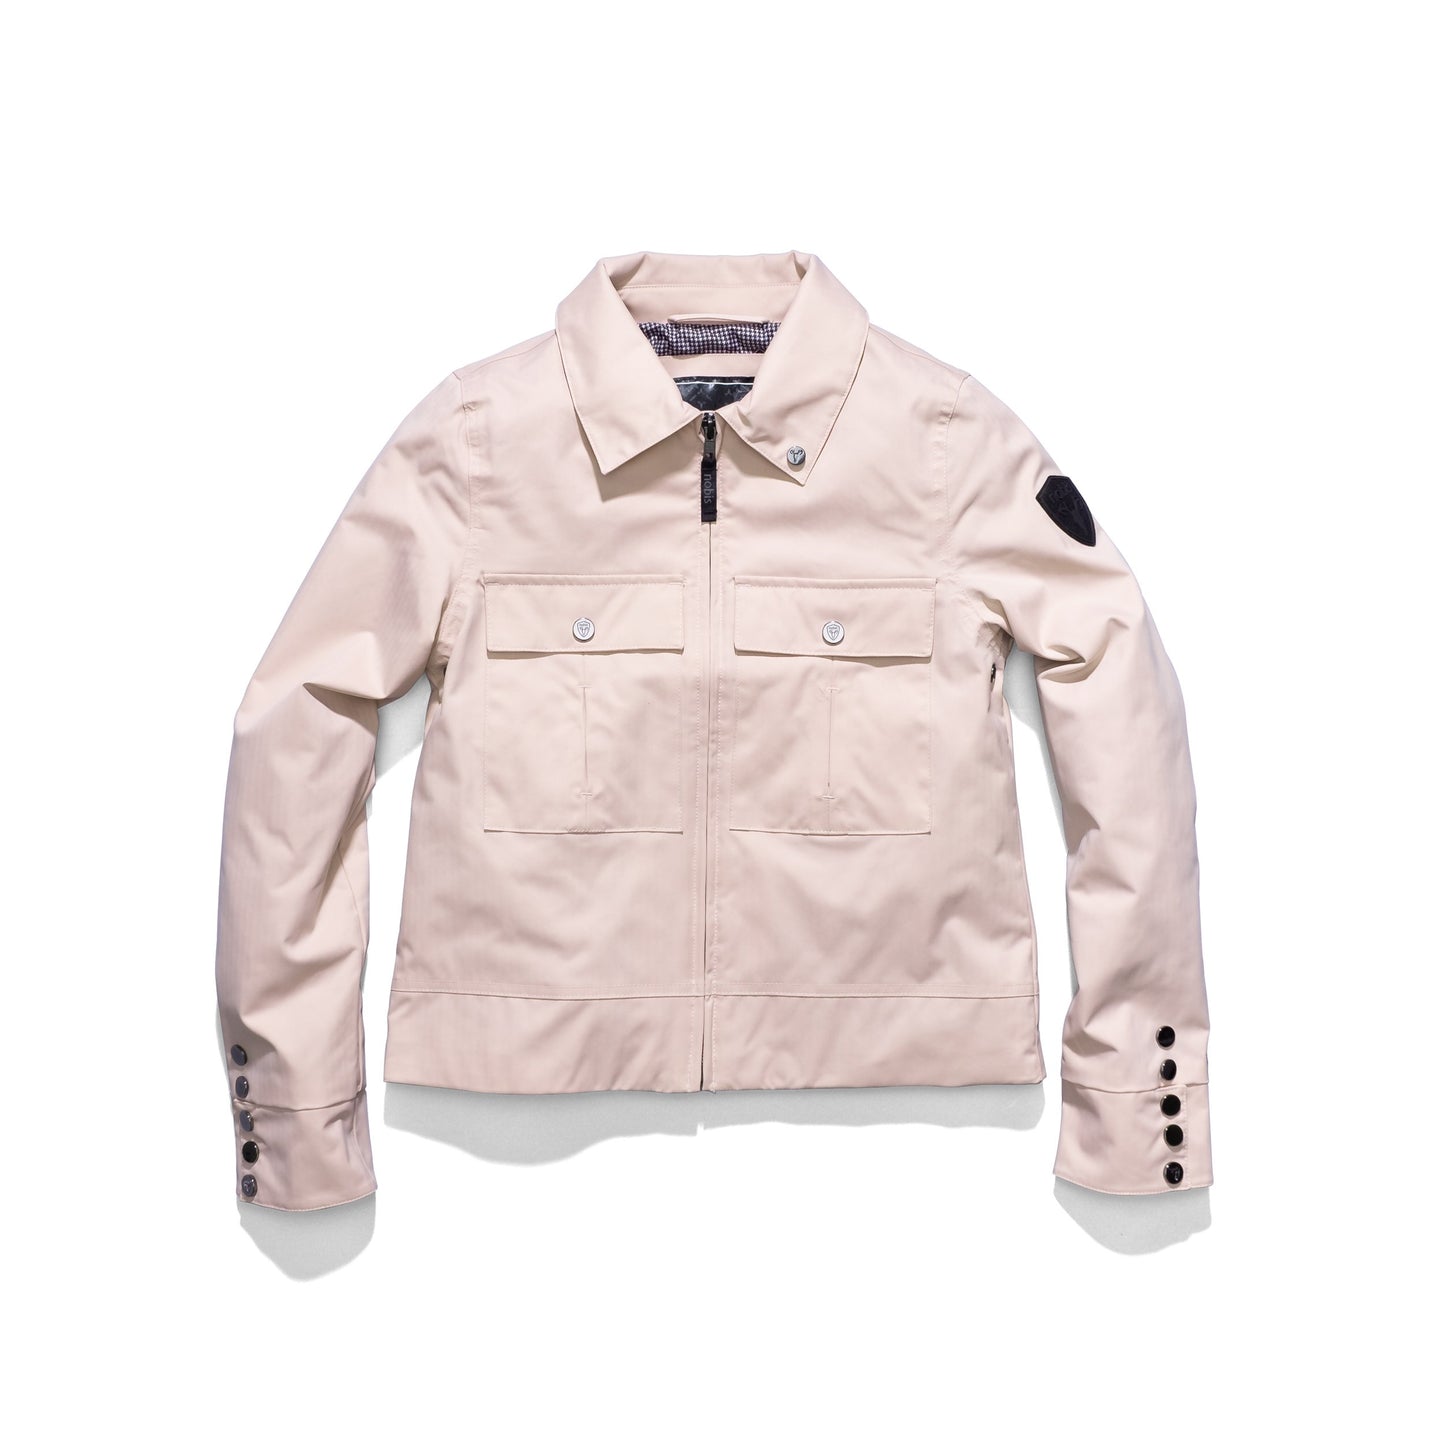 Women's cropped military inspired jacket with shirt collar detail in Dusty Rose